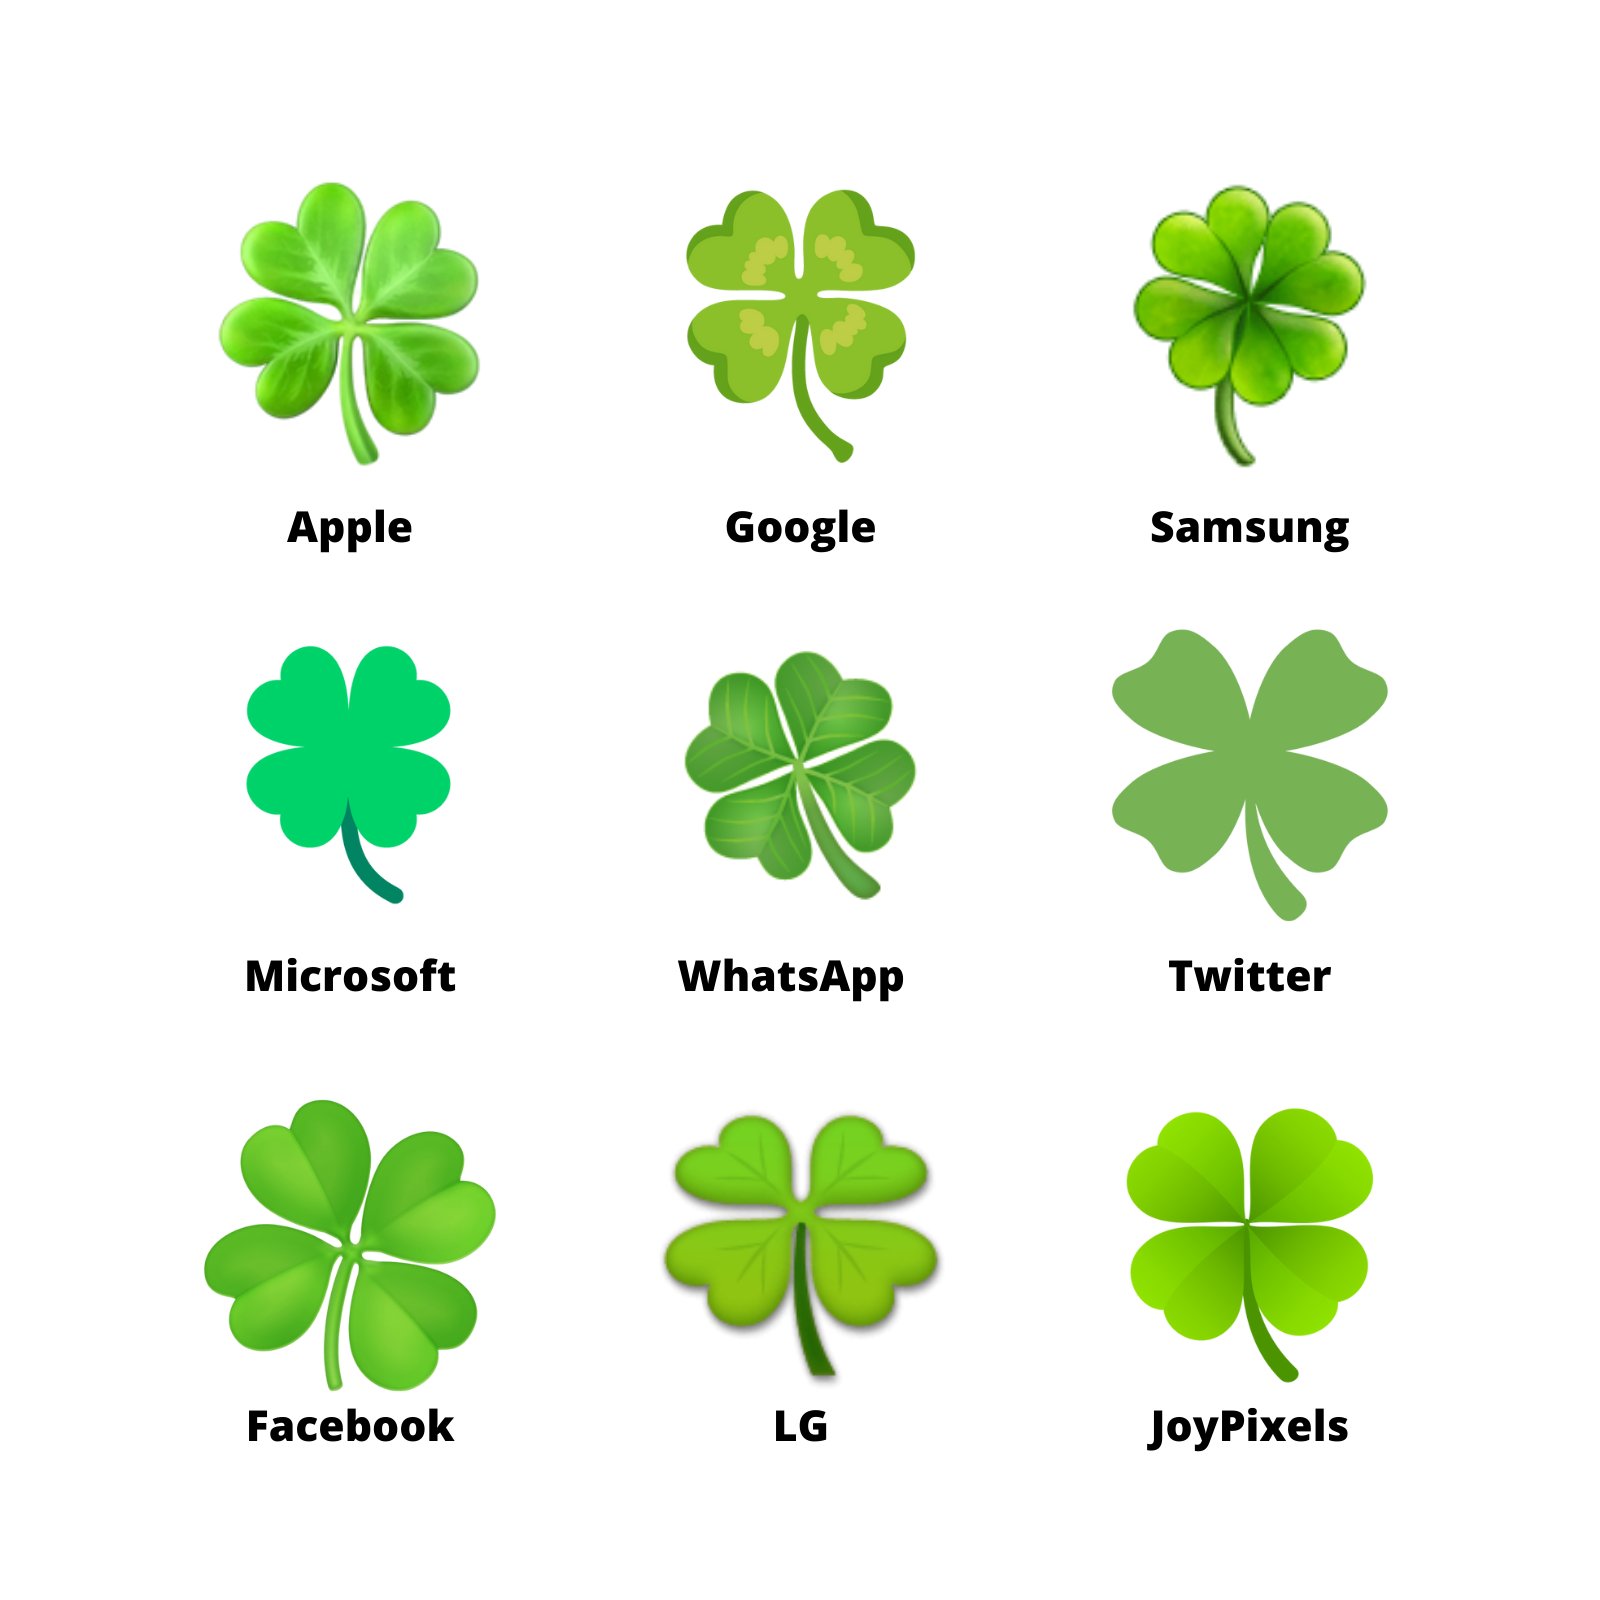 Emojipedia on X: 🍀 Four Leaf Clover: A four-leaf clover, a symbol of good  luck. Depicted as a bright green sprig of clover, with four, heart-shaped  leaves. Not to be confused with